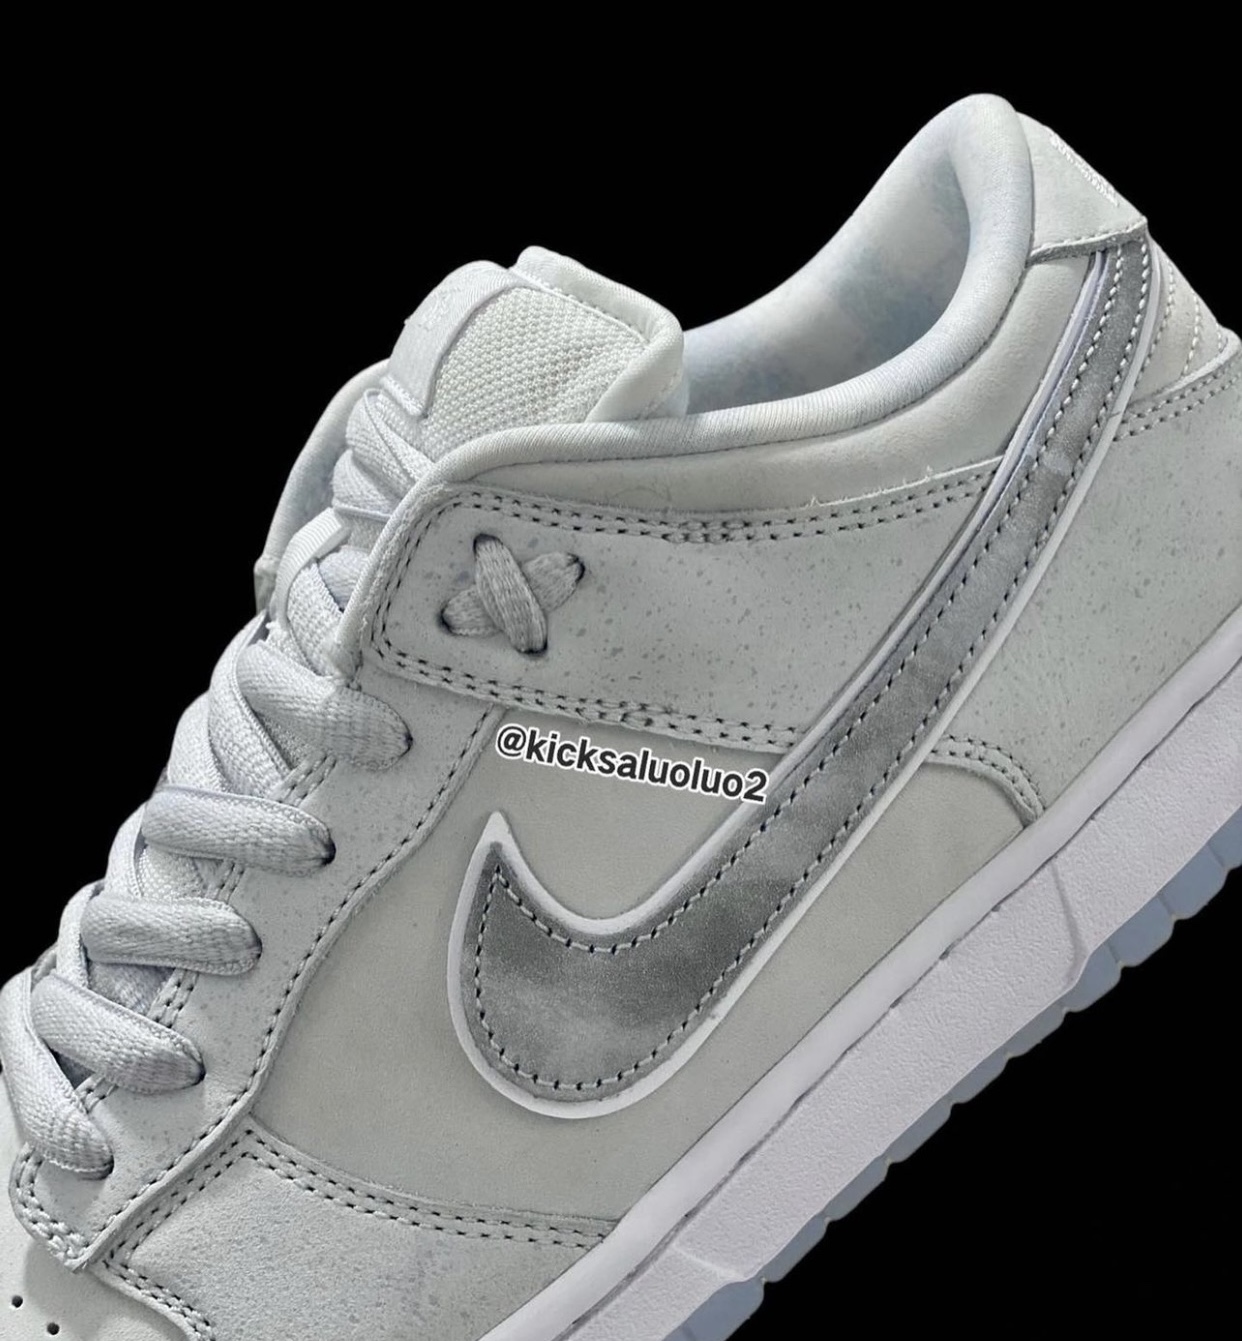 Concepts Nike SB Dunk Low White Lobster FD8776-100 Release Date Pricing